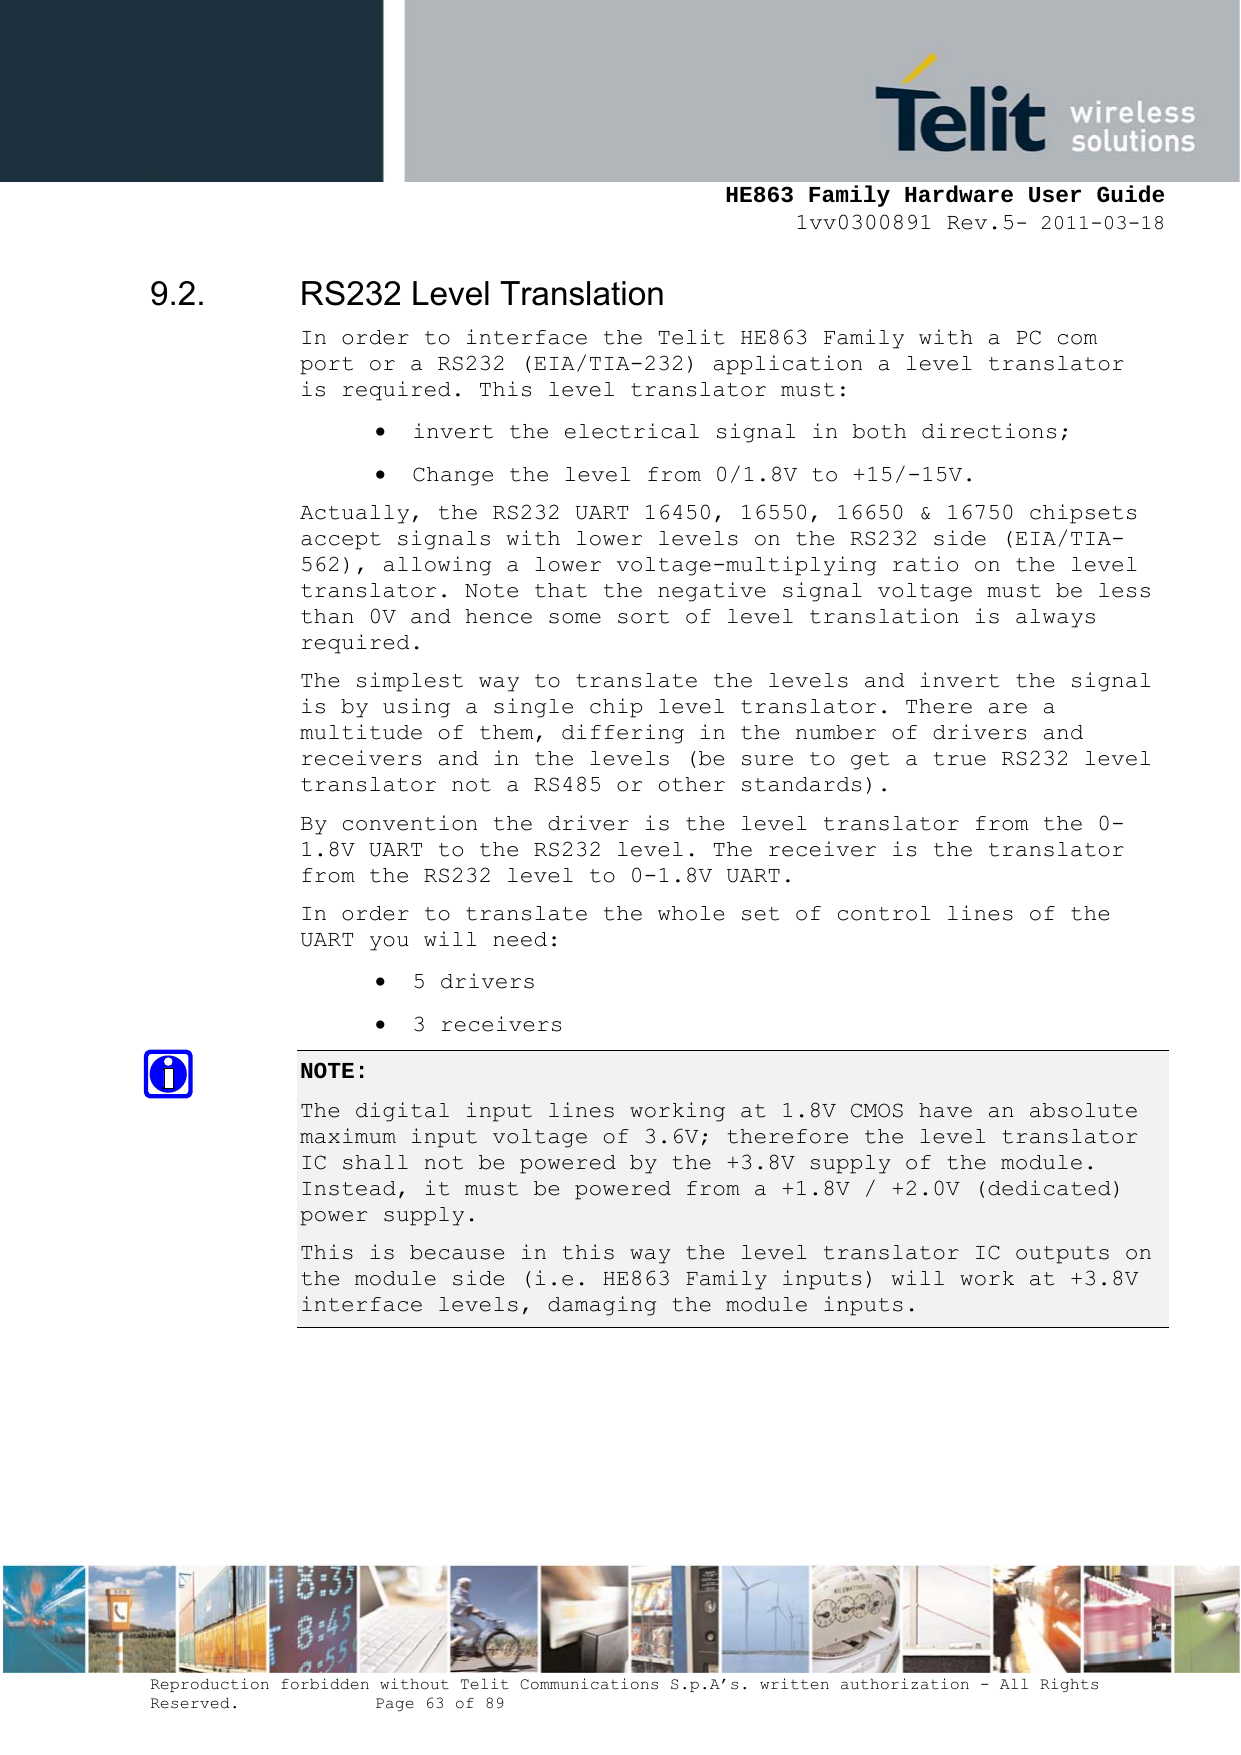     HE863 Family Hardware User Guide 1vv0300891 Rev.5- 2011-03-18    Reproduction forbidden without Telit Communications S.p.A’s. written authorization - All Rights Reserved.    Page 63 of 89  9.2.  RS232 Level Translation In order to interface the Telit HE863 Family with a PC com port or a RS232 (EIA/TIA-232) application a level translator is required. This level translator must:  invert the electrical signal in both directions;  Change the level from 0/1.8V to +15/-15V. Actually, the RS232 UART 16450, 16550, 16650 &amp; 16750 chipsets accept signals with lower levels on the RS232 side (EIA/TIA-562), allowing a lower voltage-multiplying ratio on the level translator. Note that the negative signal voltage must be less than 0V and hence some sort of level translation is always required.  The simplest way to translate the levels and invert the signal is by using a single chip level translator. There are a multitude of them, differing in the number of drivers and receivers and in the levels (be sure to get a true RS232 level translator not a RS485 or other standards). By convention the driver is the level translator from the 0-1.8V UART to the RS232 level. The receiver is the translator from the RS232 level to 0-1.8V UART. In order to translate the whole set of control lines of the UART you will need:  5 drivers  3 receivers NOTE:  The digital input lines working at 1.8V CMOS have an absolute maximum input voltage of 3.6V; therefore the level translator IC shall not be powered by the +3.8V supply of the module. Instead, it must be powered from a +1.8V / +2.0V (dedicated) power supply. This is because in this way the level translator IC outputs on the module side (i.e. HE863 Family inputs) will work at +3.8V interface levels, damaging the module inputs.  